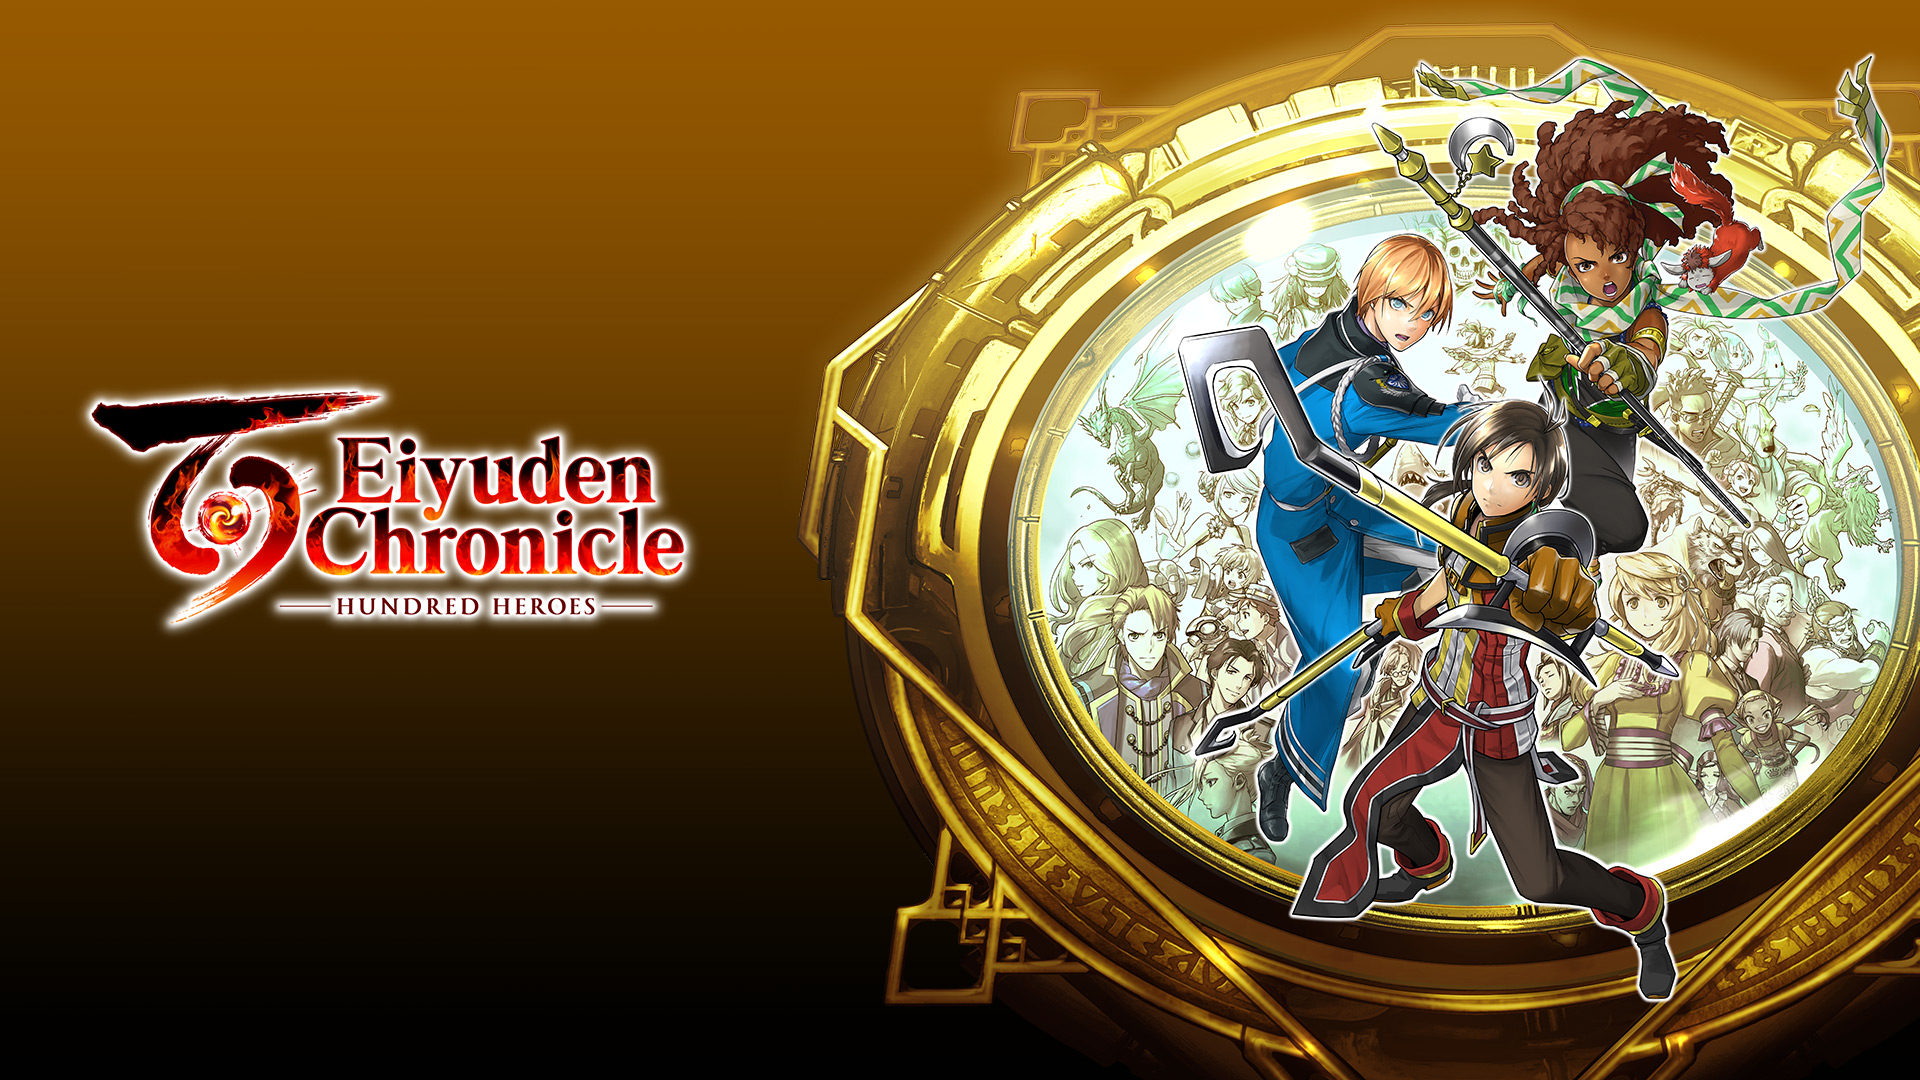 Eiyuden Chronicle: Hundred Heroes digital preorders now available